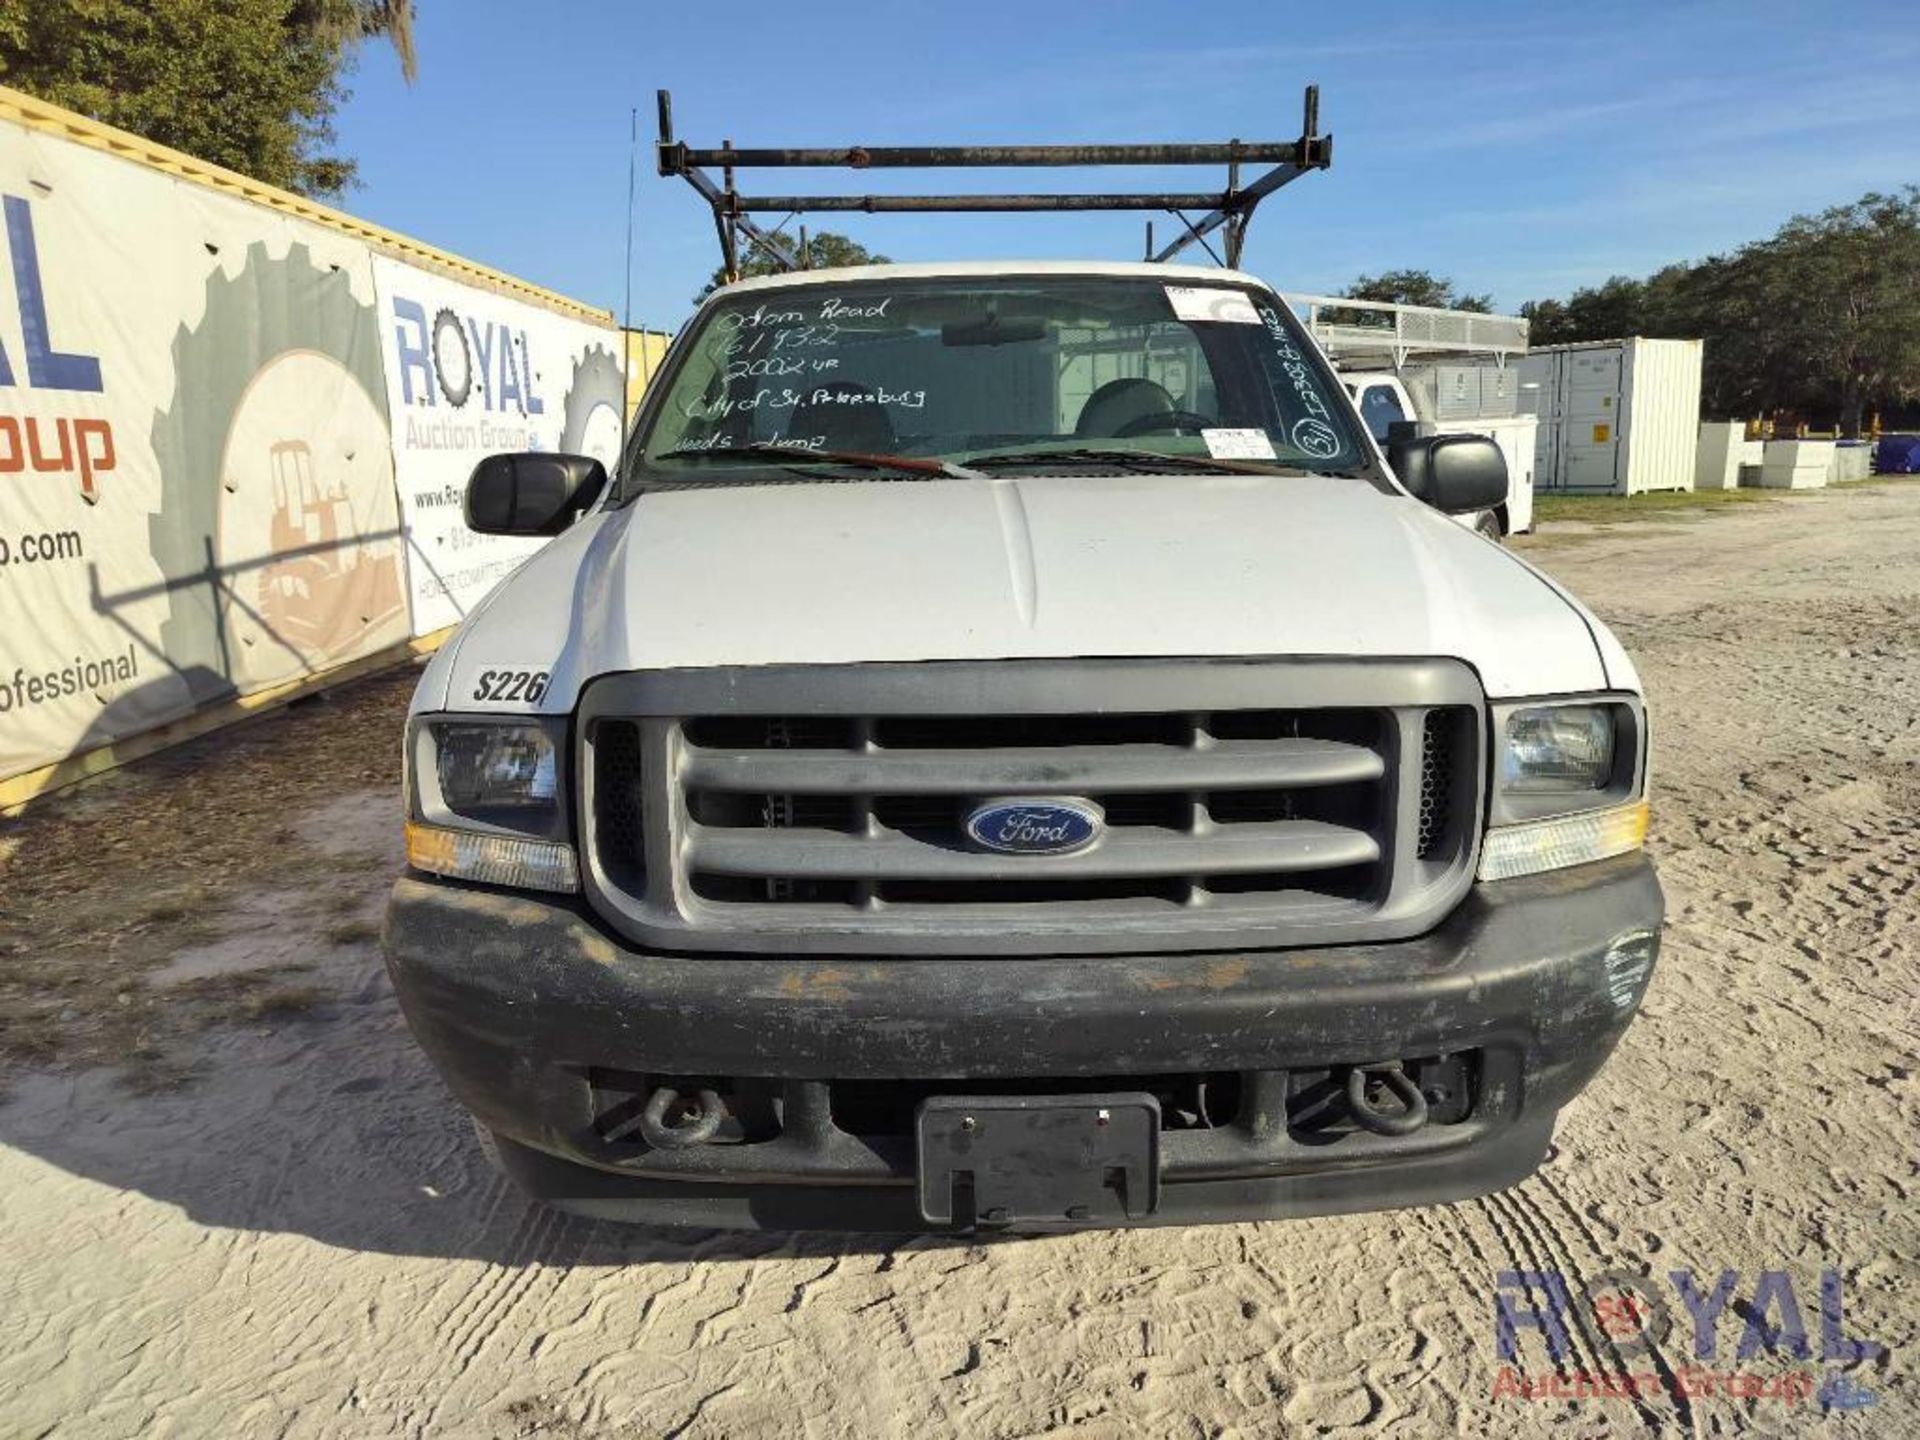 2002 Ford F250 Pickup Truck - Image 9 of 23